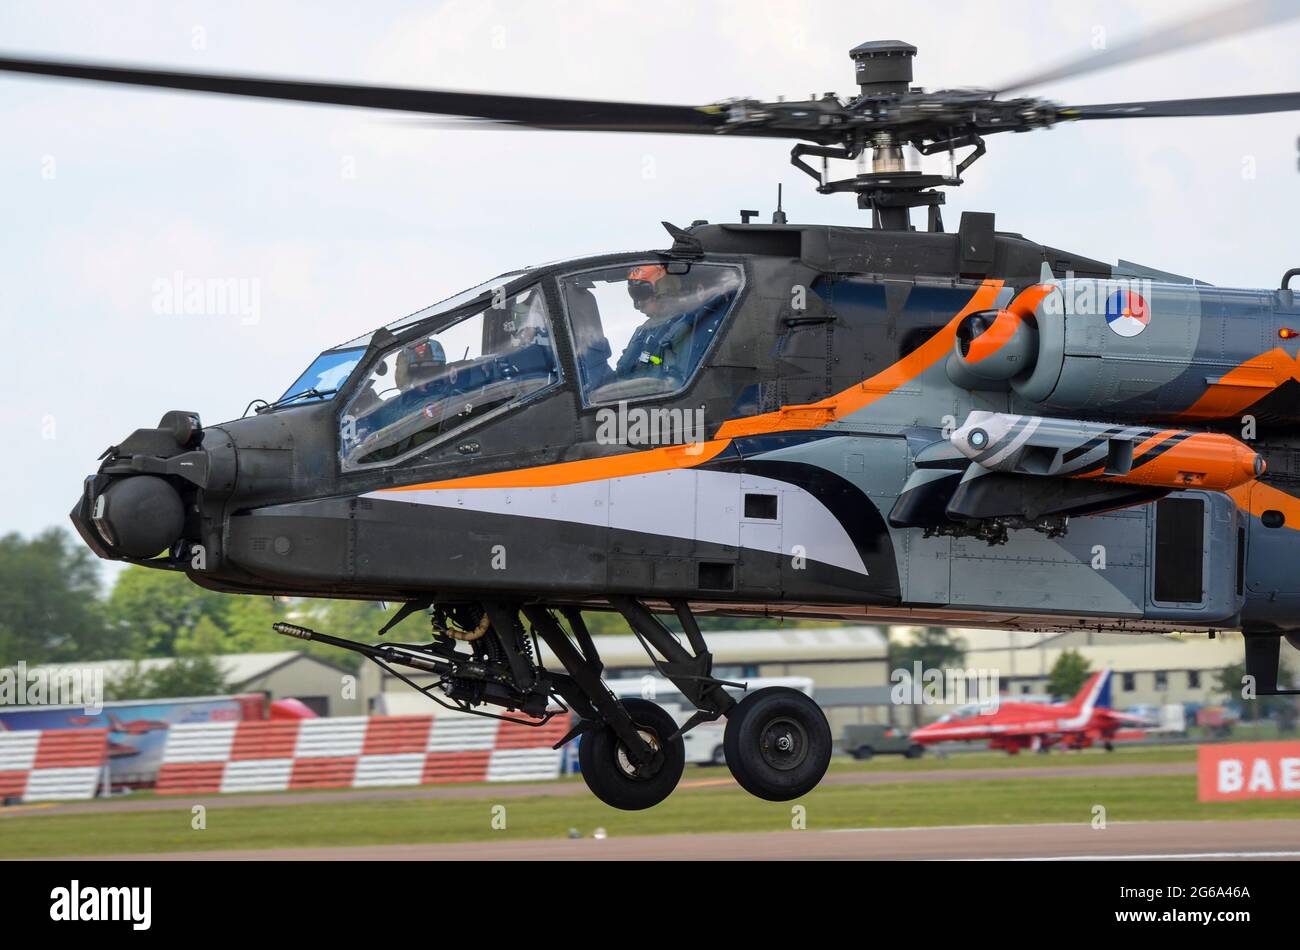 Royal Netherlands Air Force Boeing AH-64D Apache gunship attack helicopter at RIAT airshow, RAF Fairford, in special national colours display finish Stock Photo